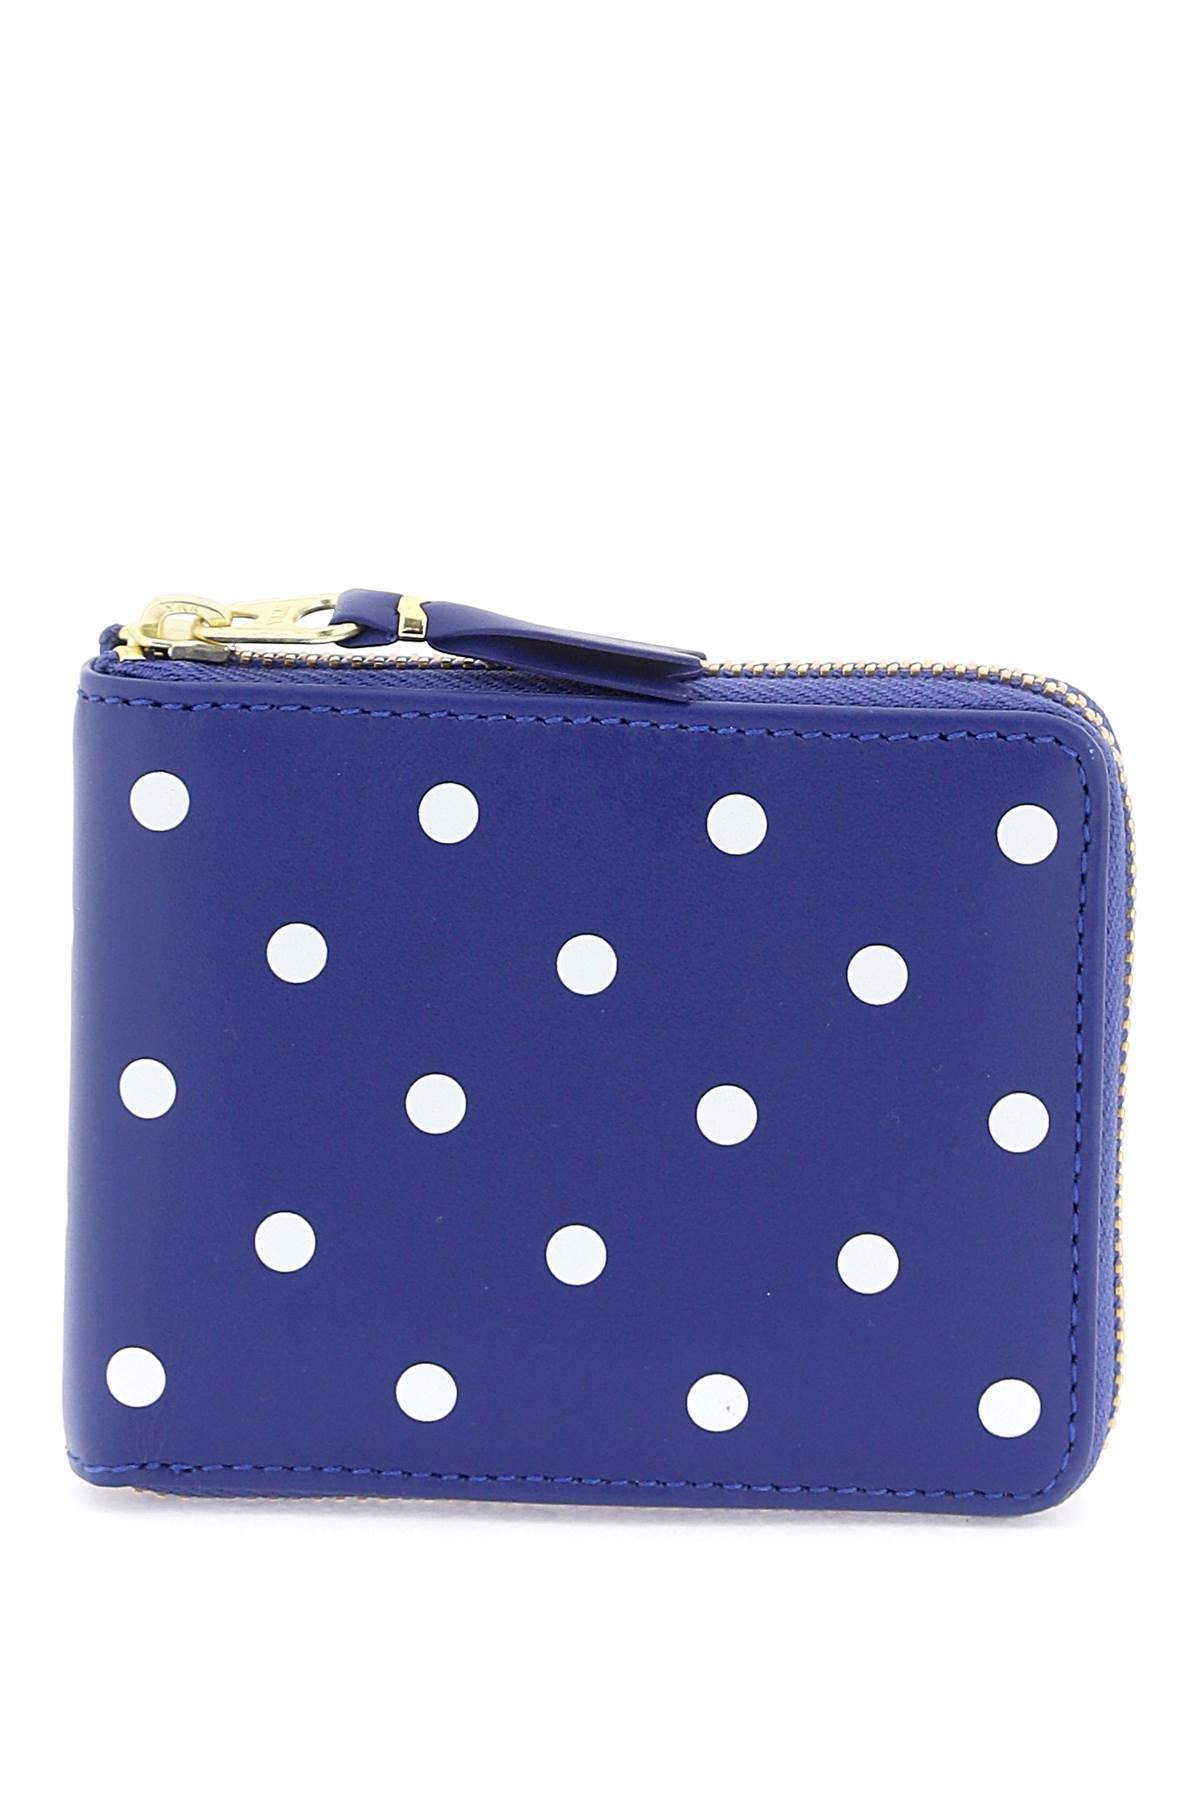 Comme Des Garcons Wallet Polka Dot Zip Around Wallet With   Blue